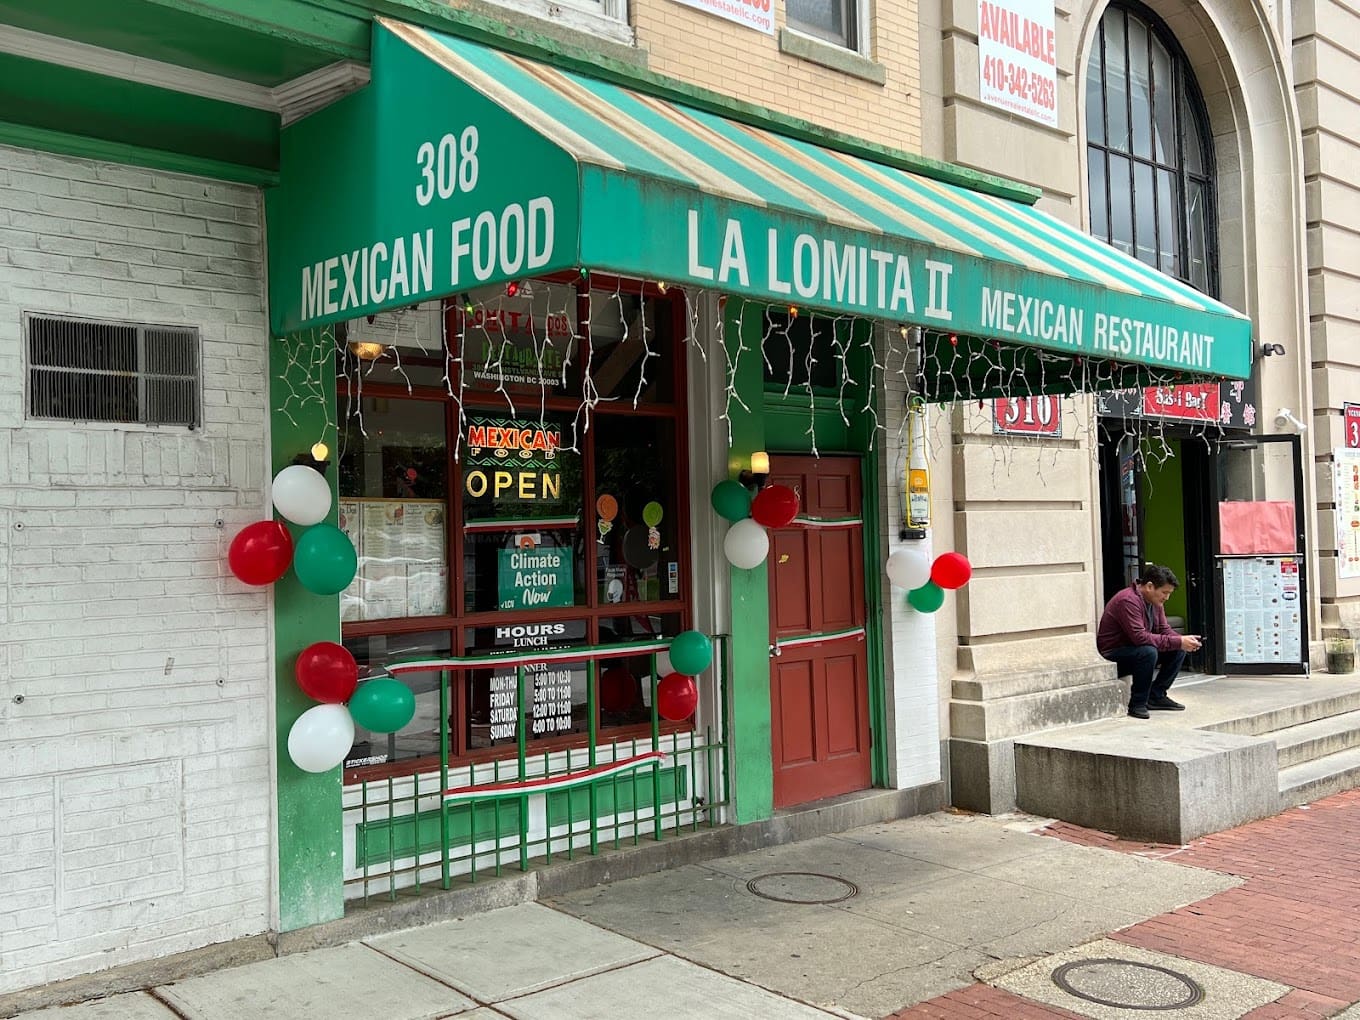 A photo of La Lomita Dos in Washington, DC where the idea of Will Hurd becoming a congressman first materilaized.